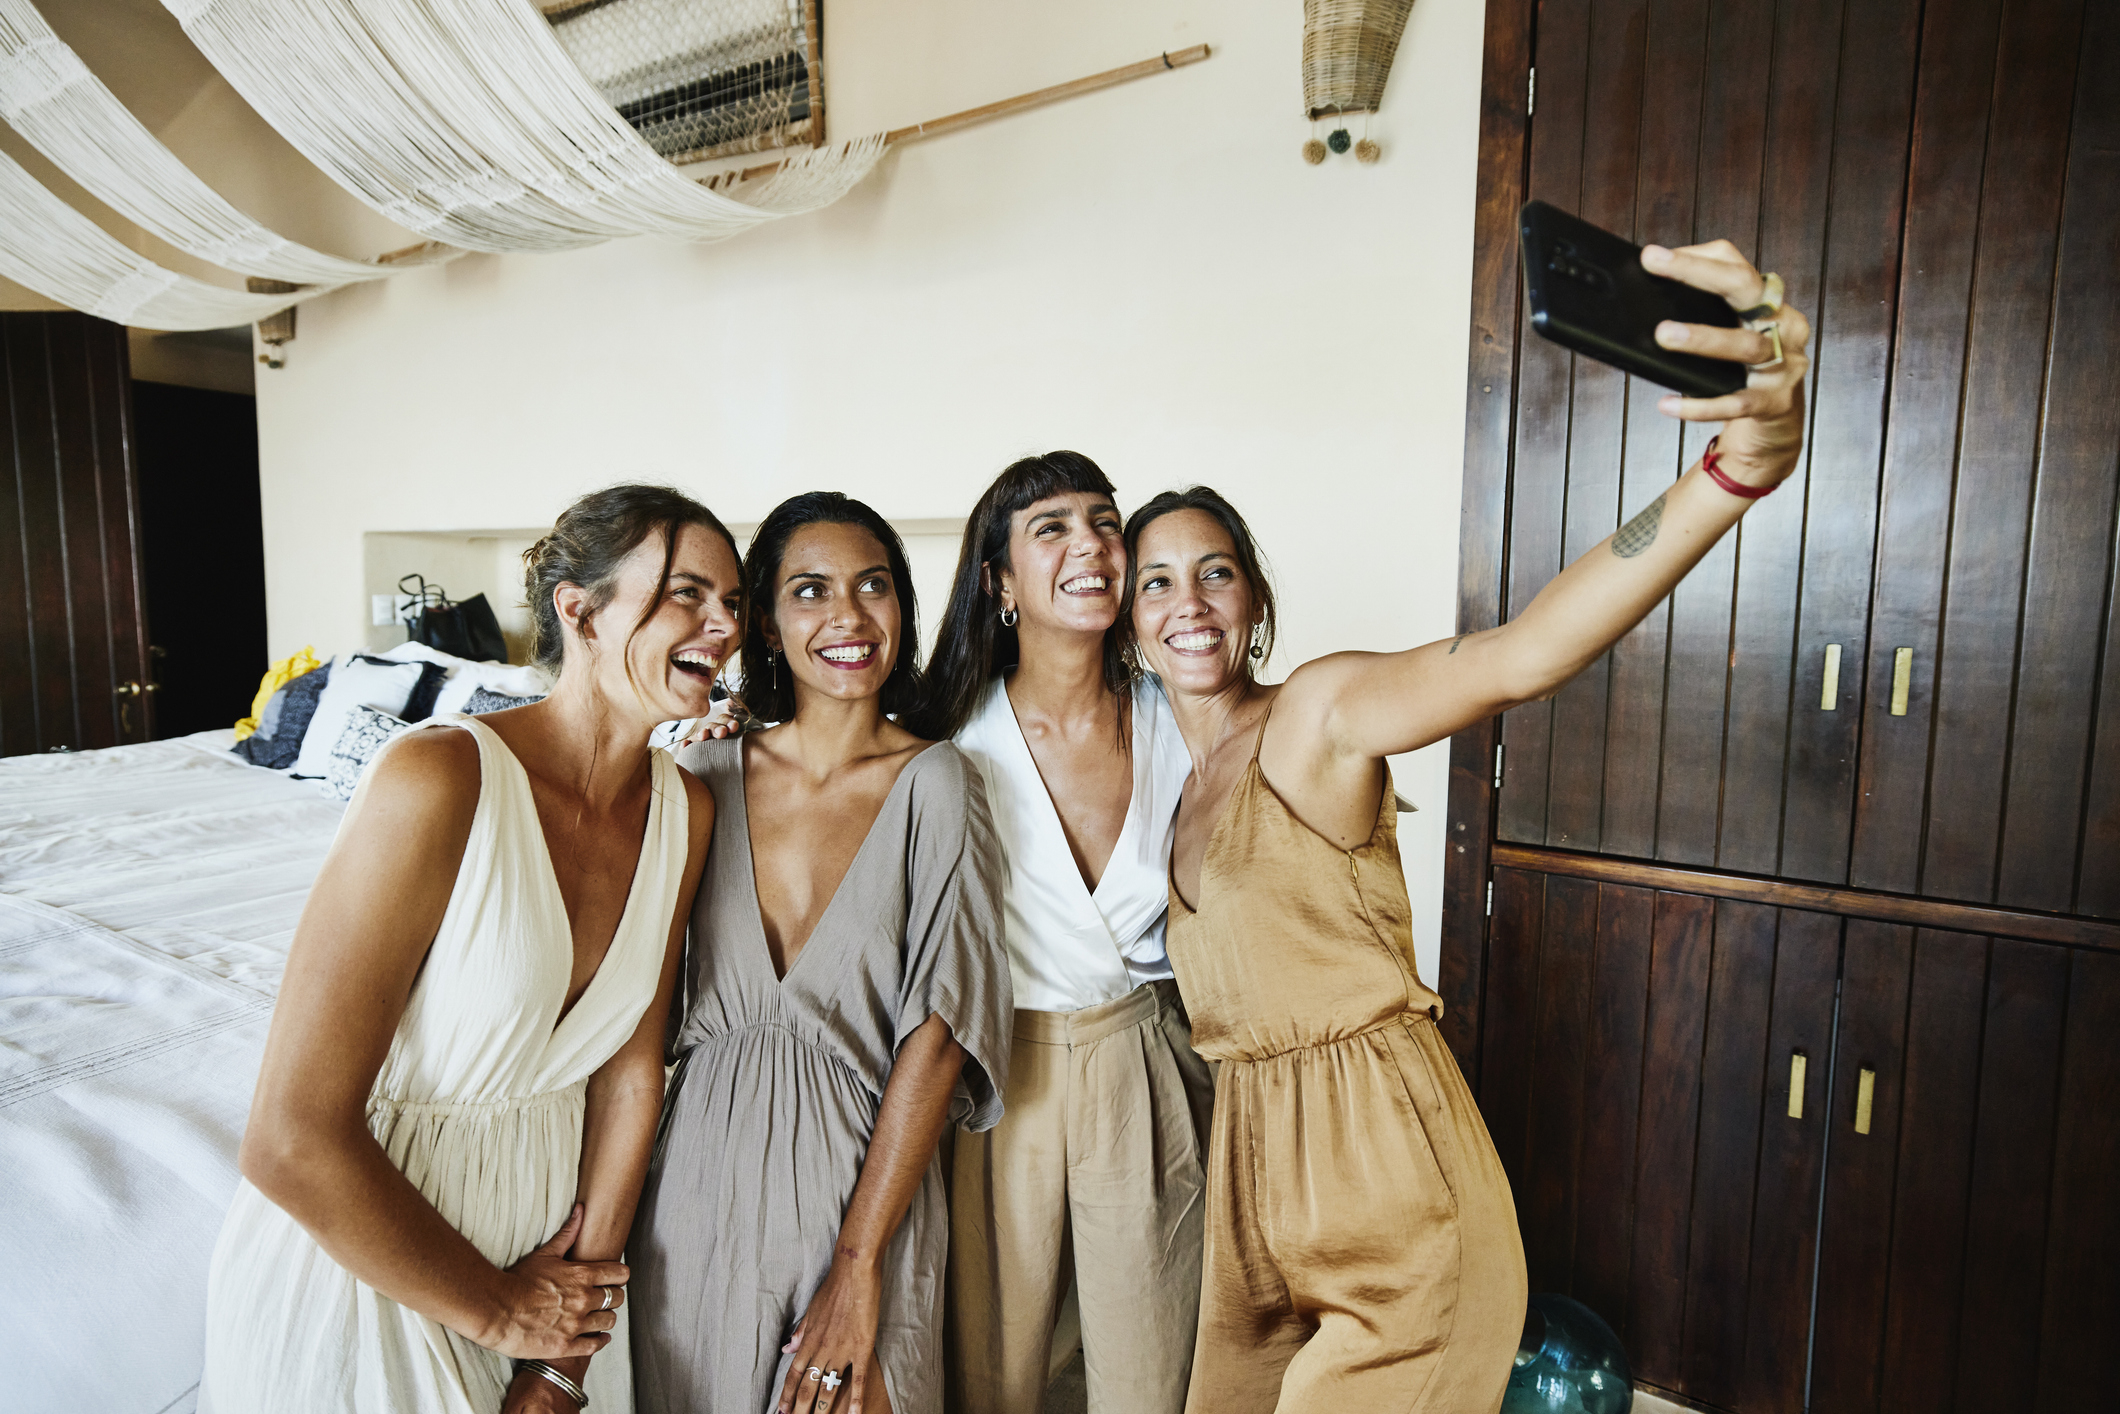 Four women in casual attire are smiling and taking a selfie indoors